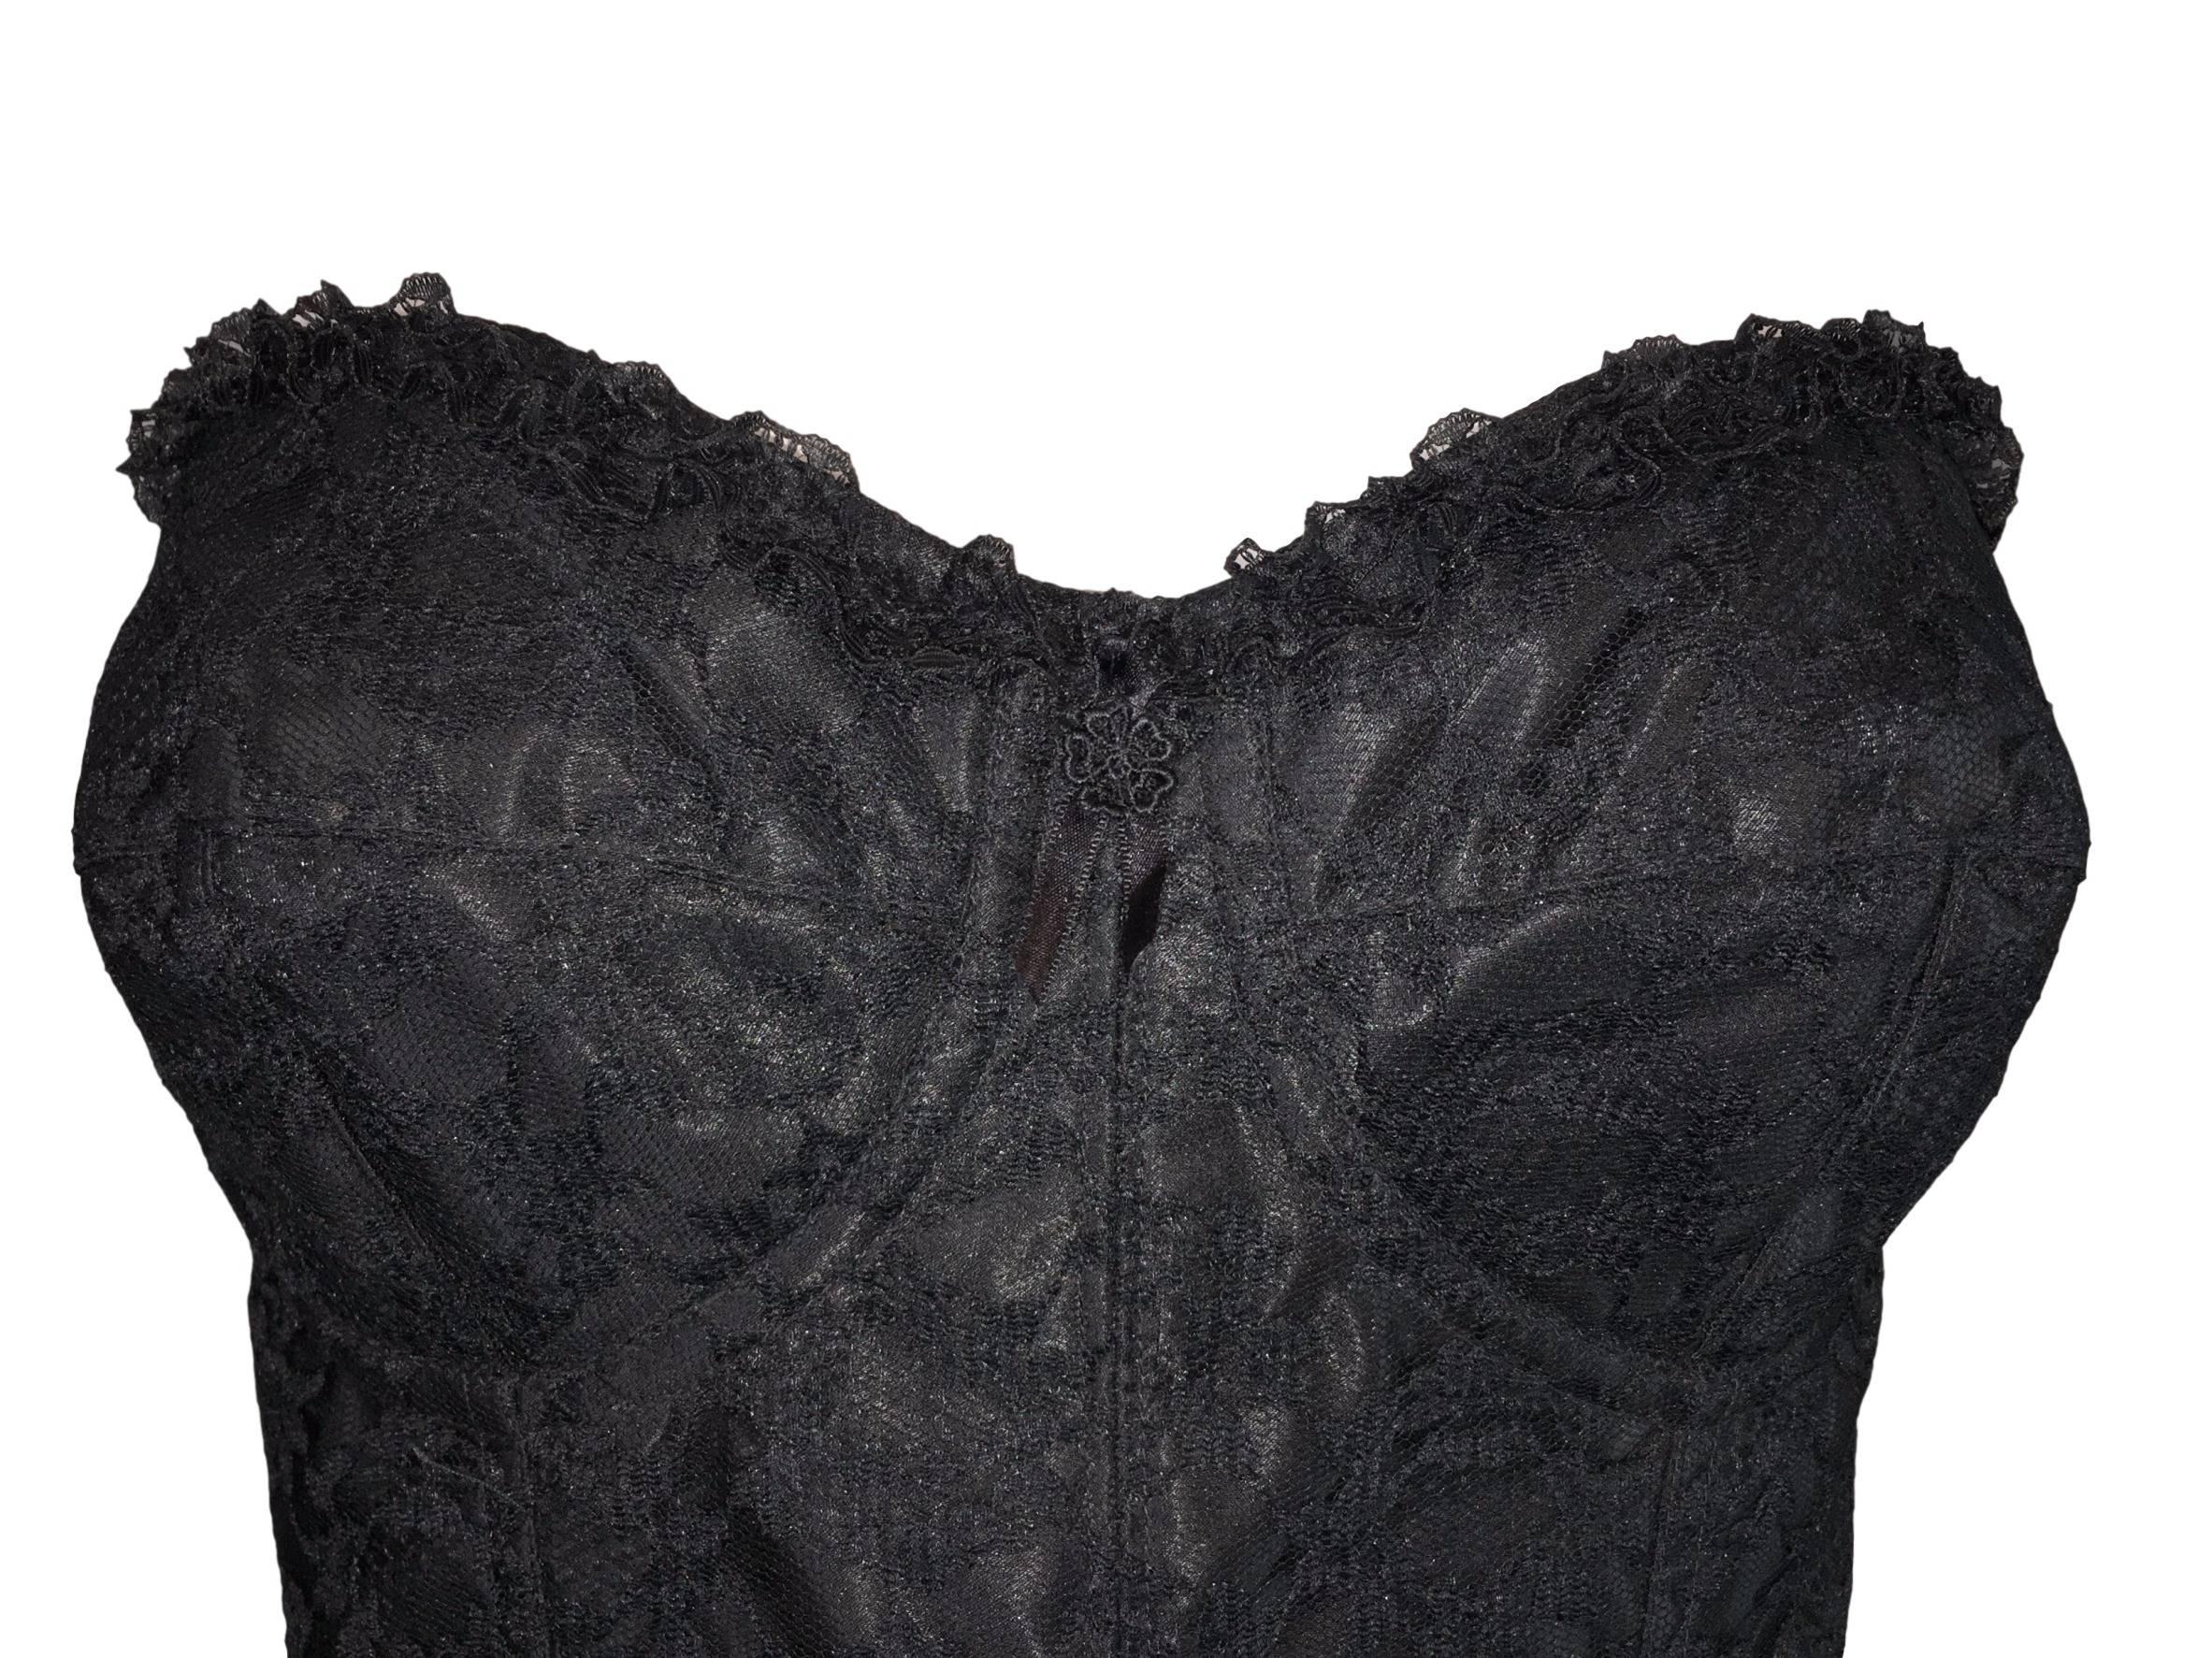 DESIGNER: S/S 1992 Dolce & Gabbana 

Please contact for more information and/or photos.

CONDITION: Good- light wear to sheer bandage fabric. 

MATERIAL: Acetate

COUNTRY MADE: Italy

SIZE: 42- fits like a medium to large with quite a bit of